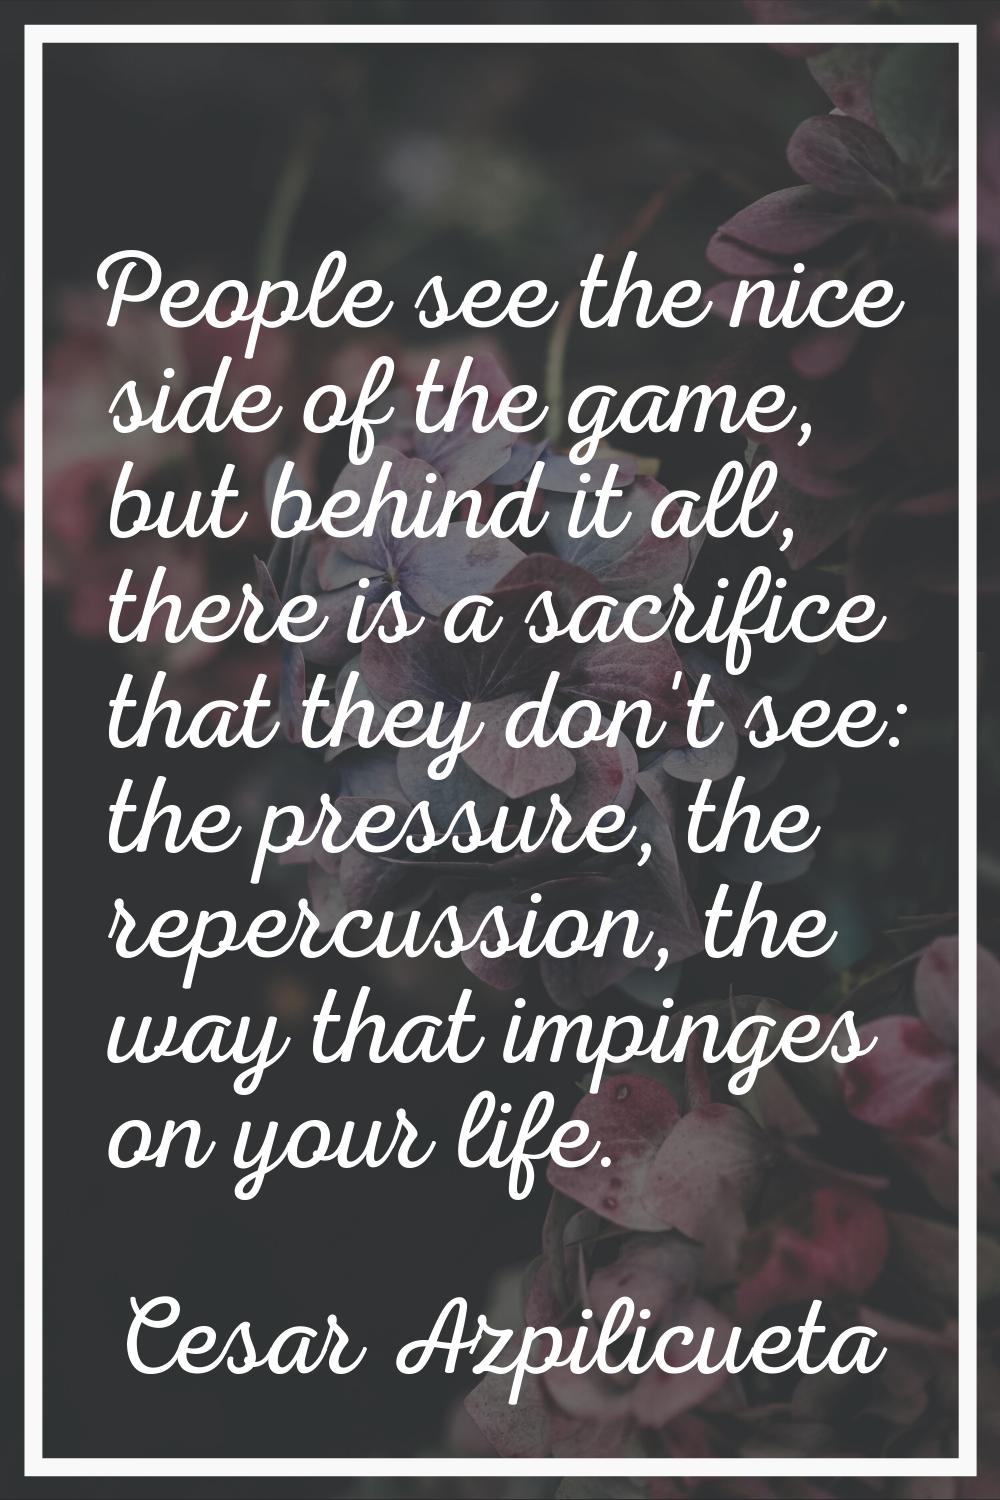 People see the nice side of the game, but behind it all, there is a sacrifice that they don't see: 